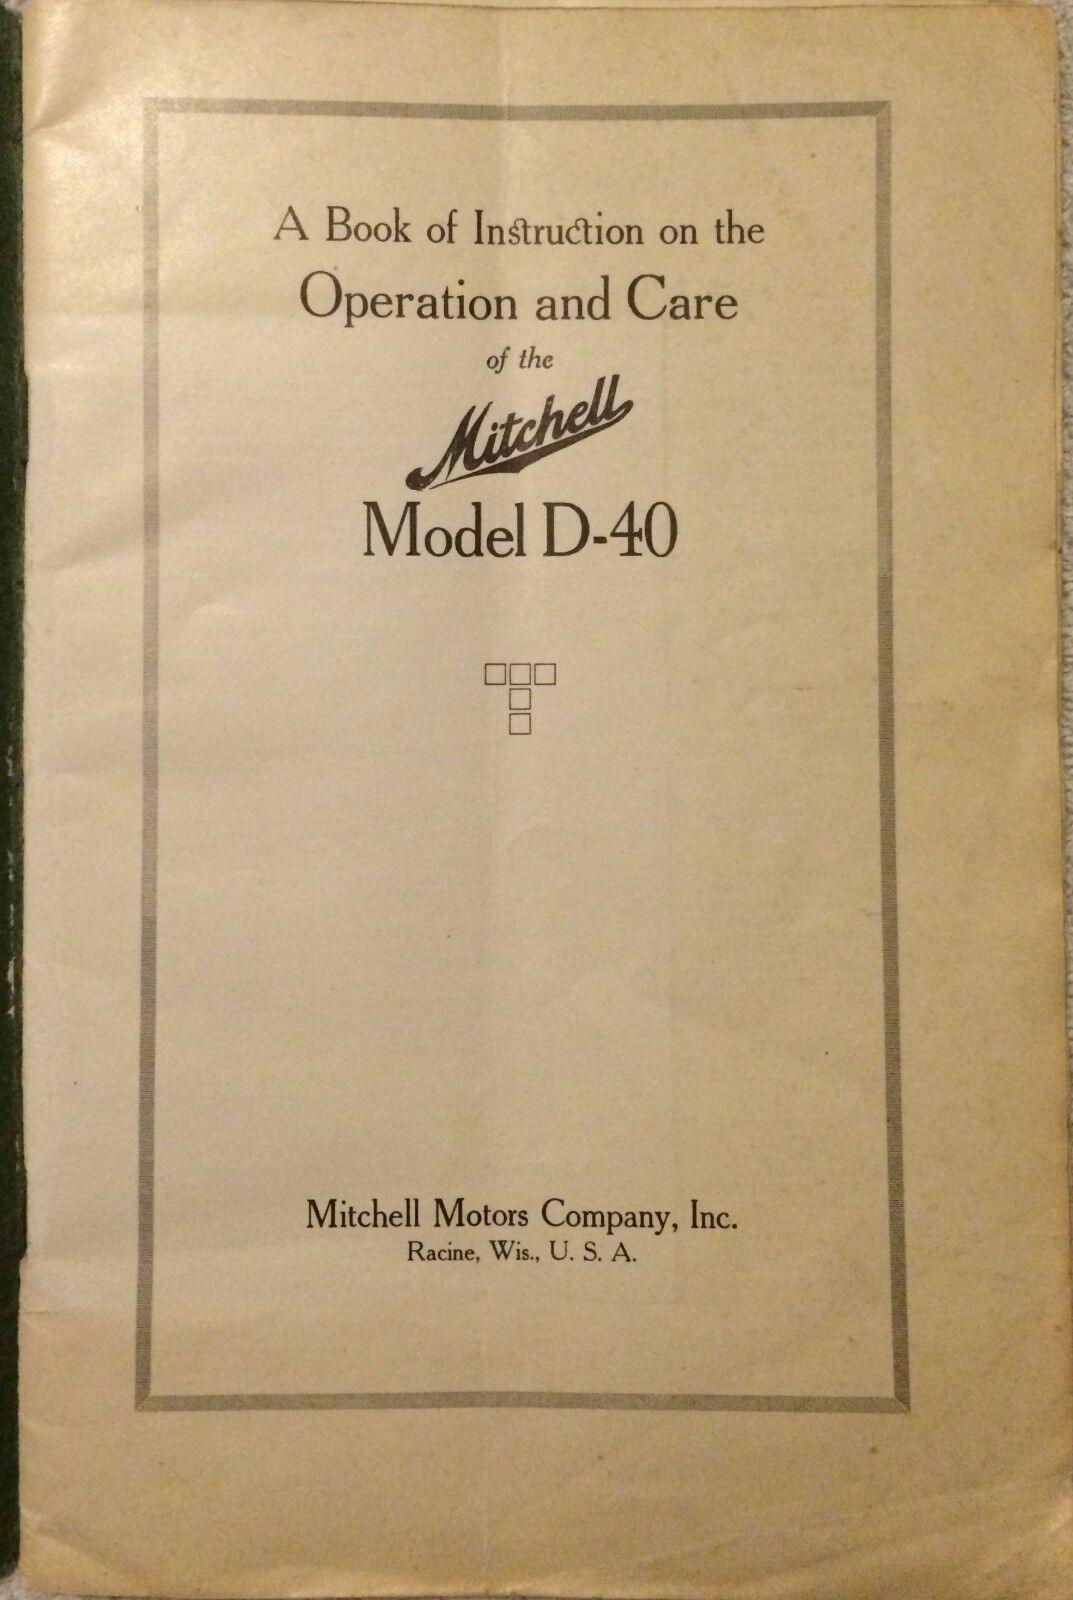 1918 Antique - Mitchell Model D-40 Book of Instruction - Operation & Care - RARE